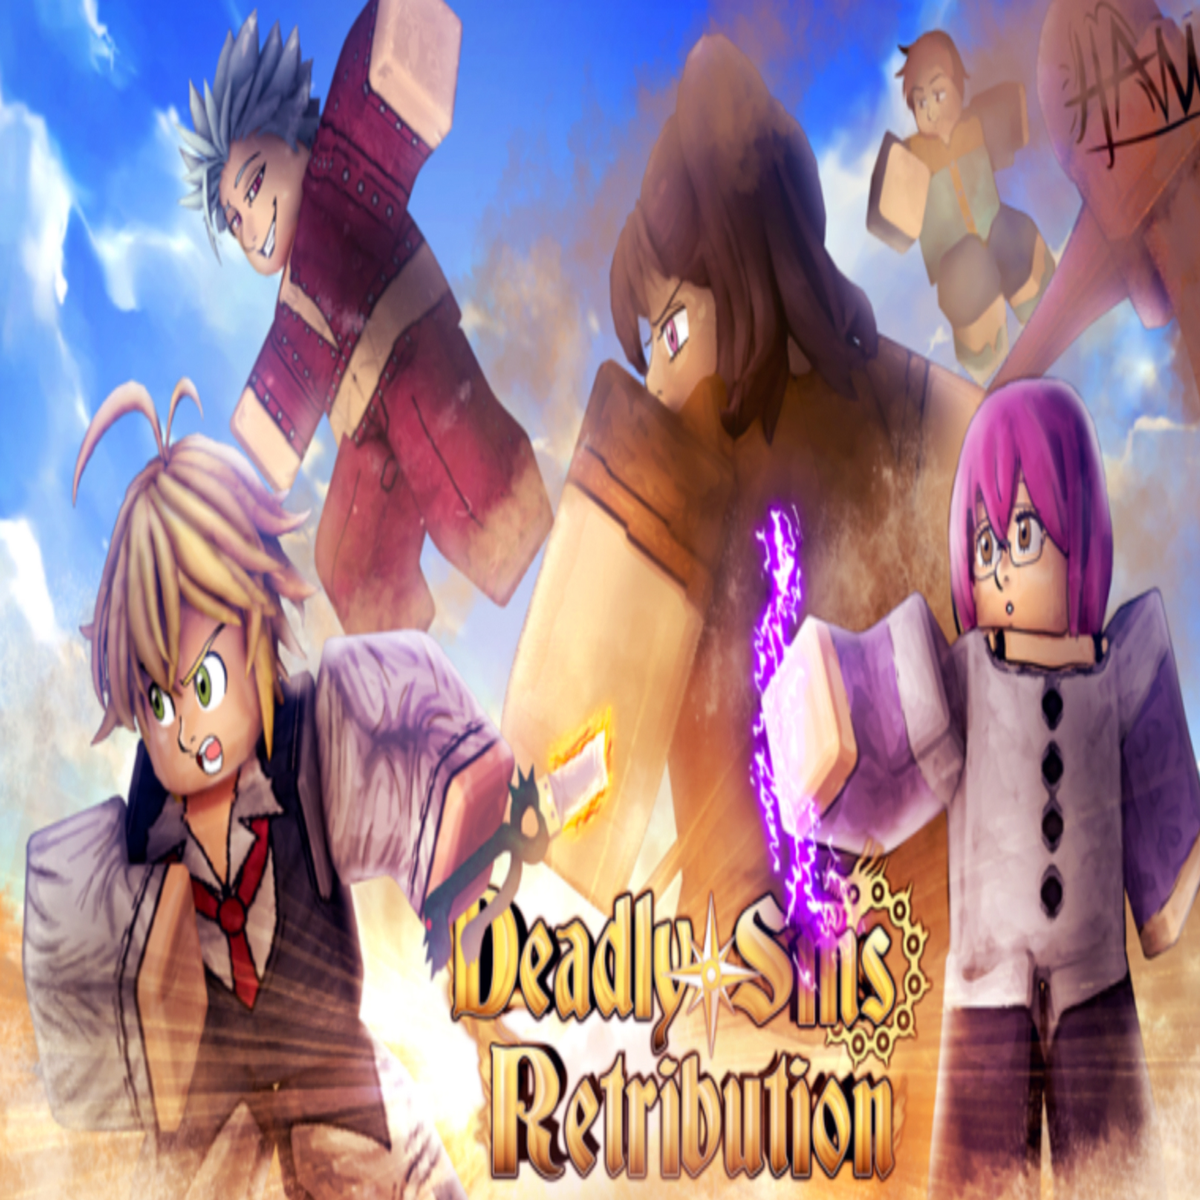 7 Deadly Sins Retribution Public Testing: How To Play/Tutorial